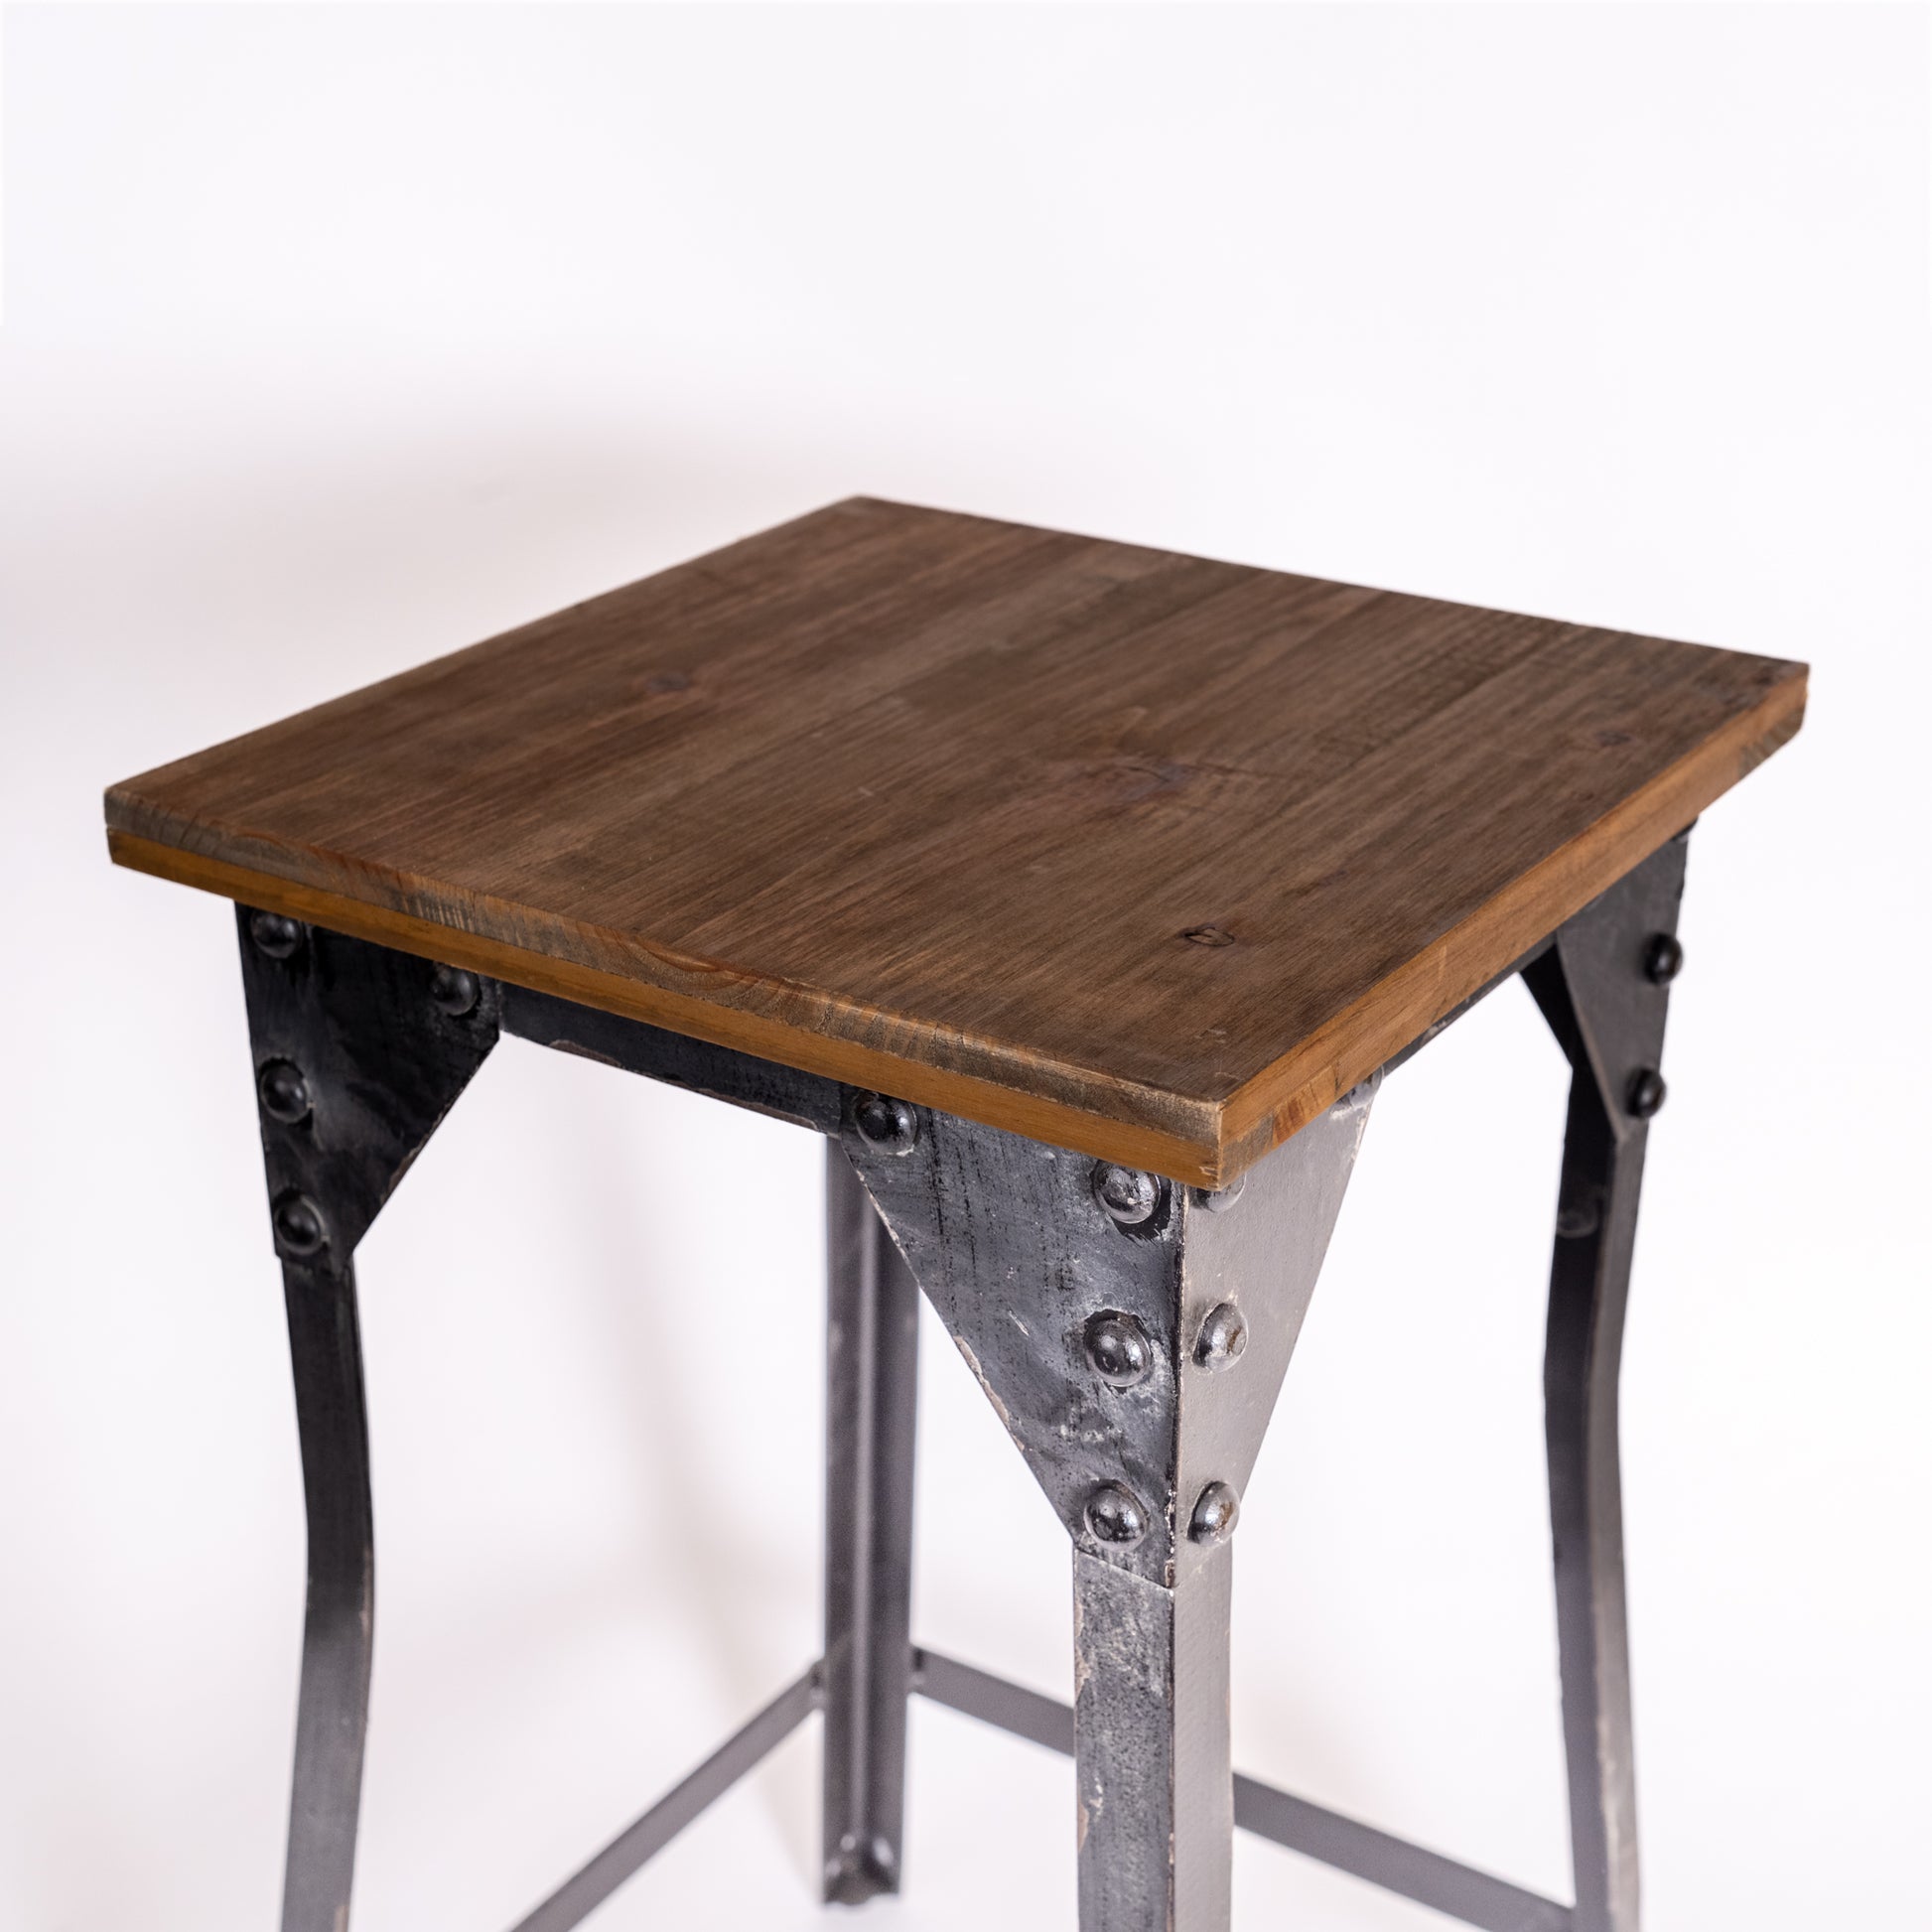 Antique stool with wooden seat